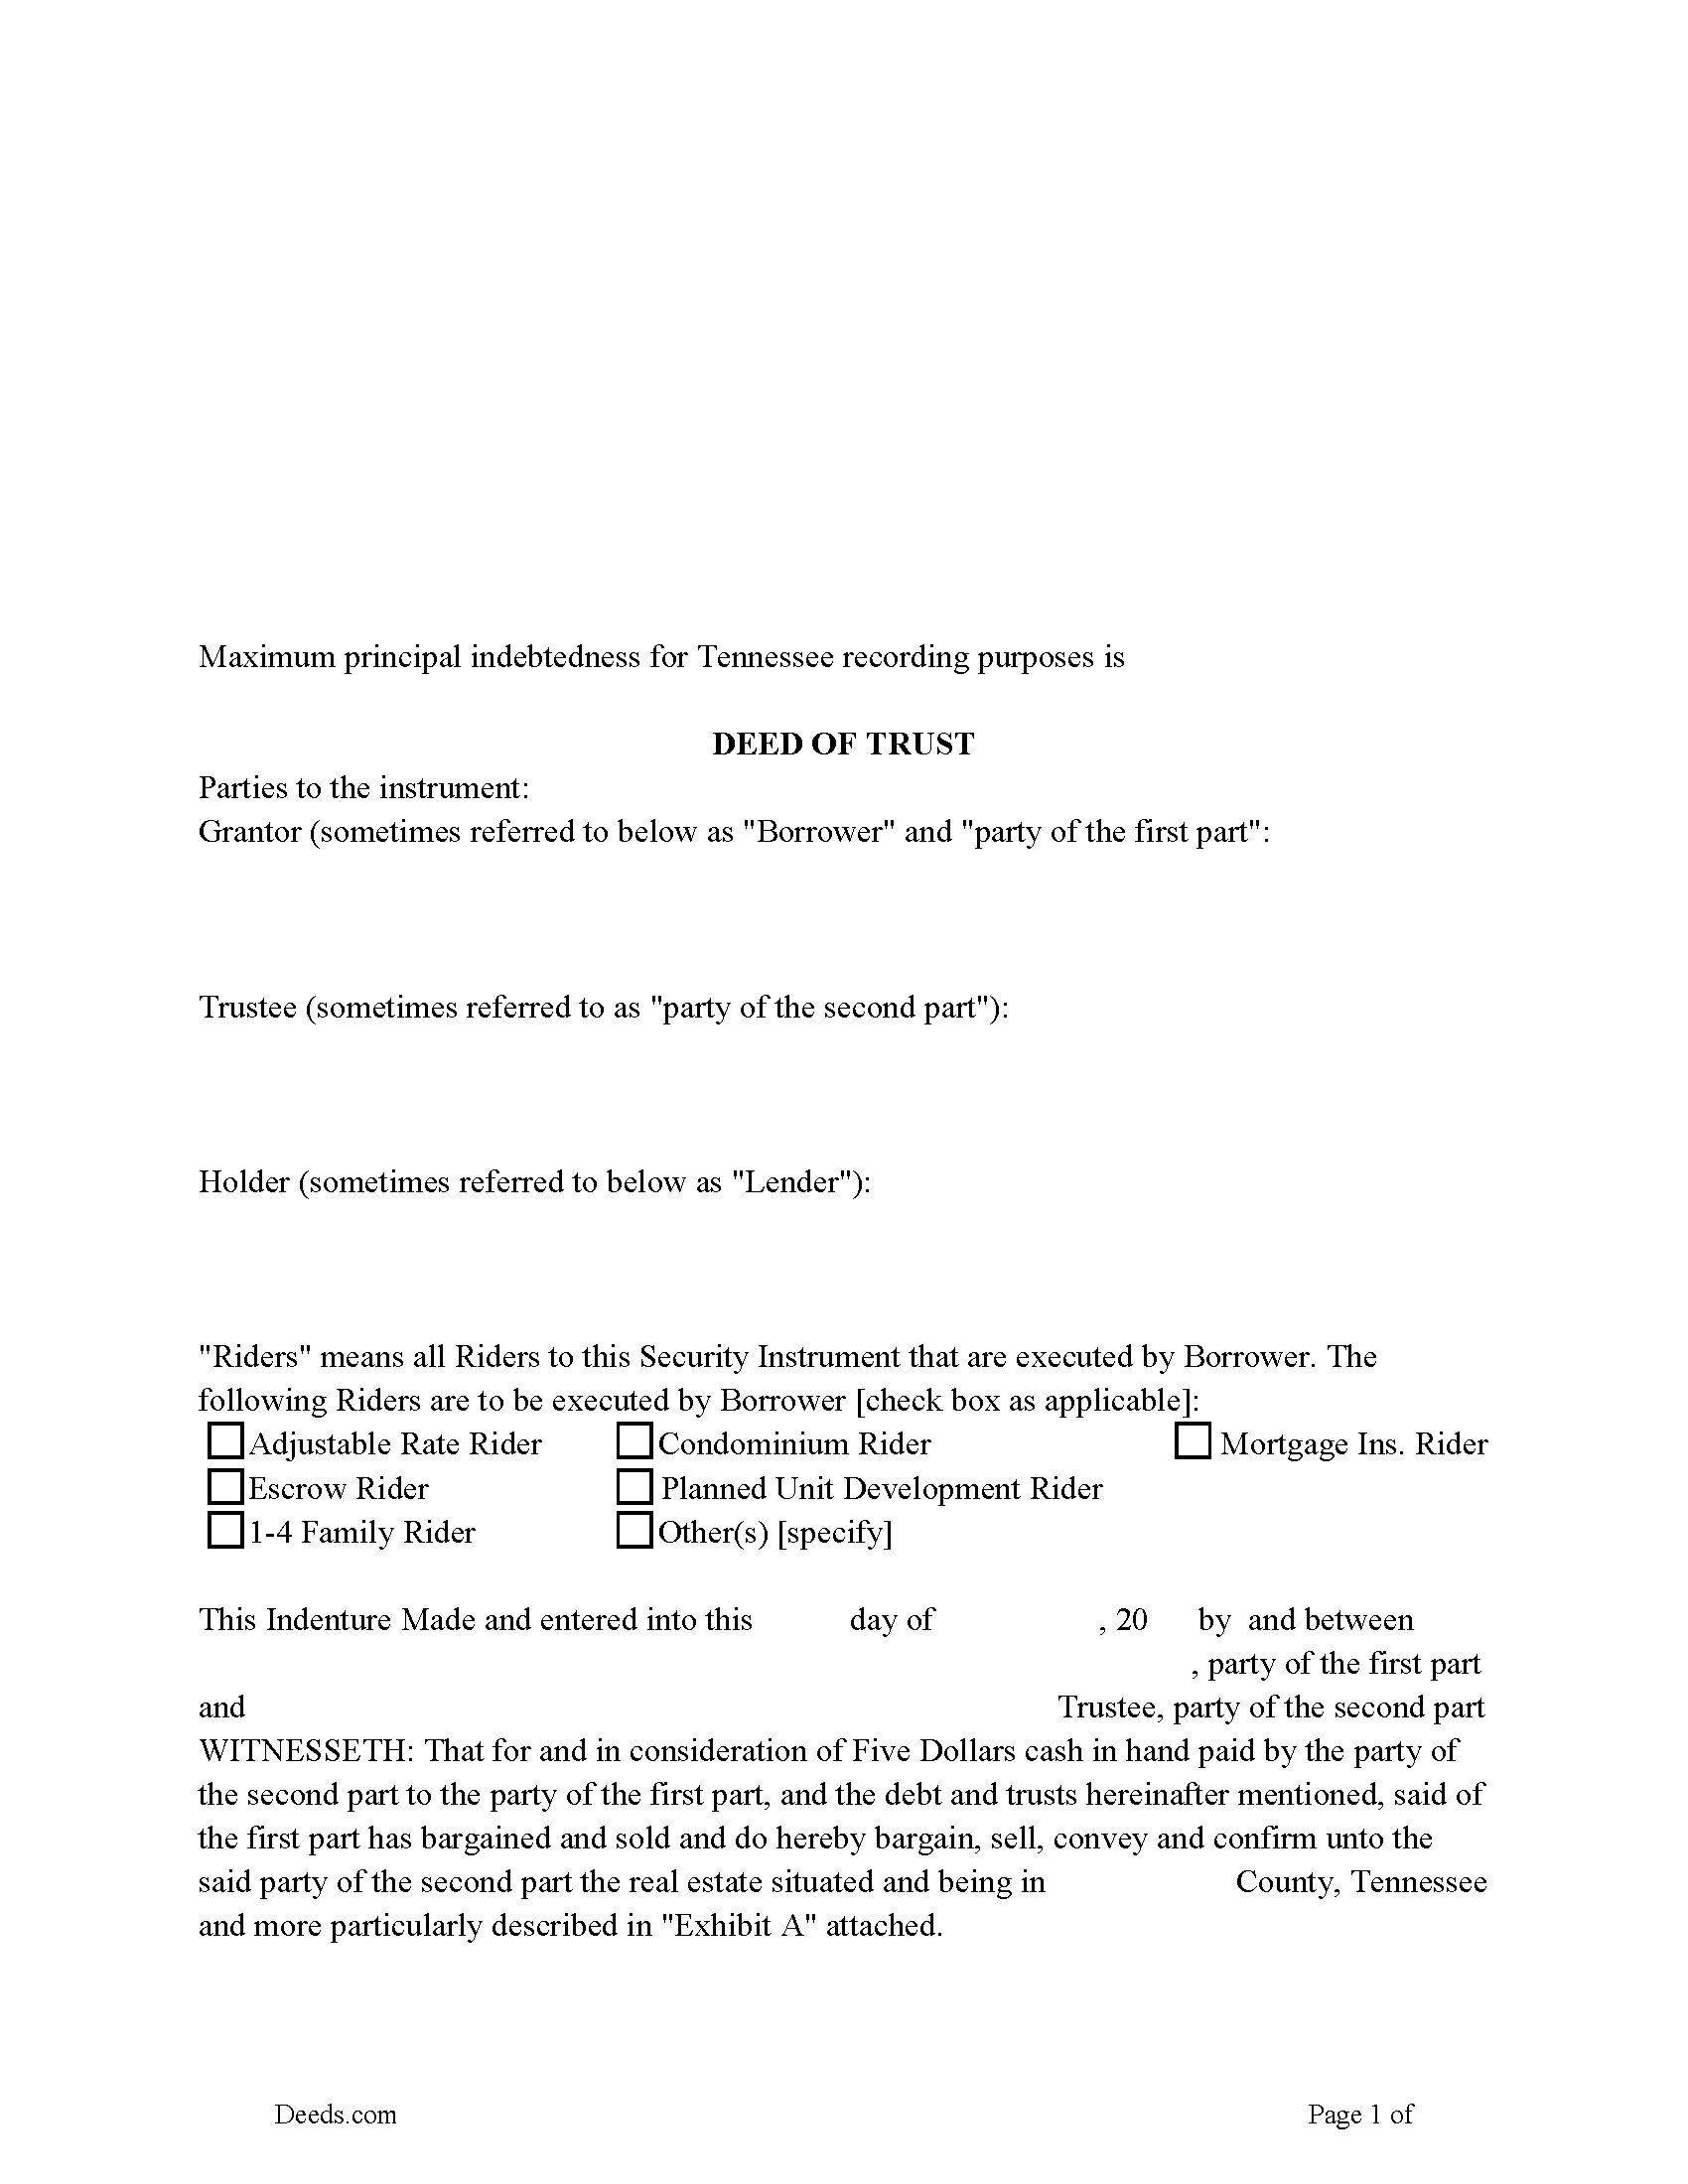 Tennessee Deed of Trust Image